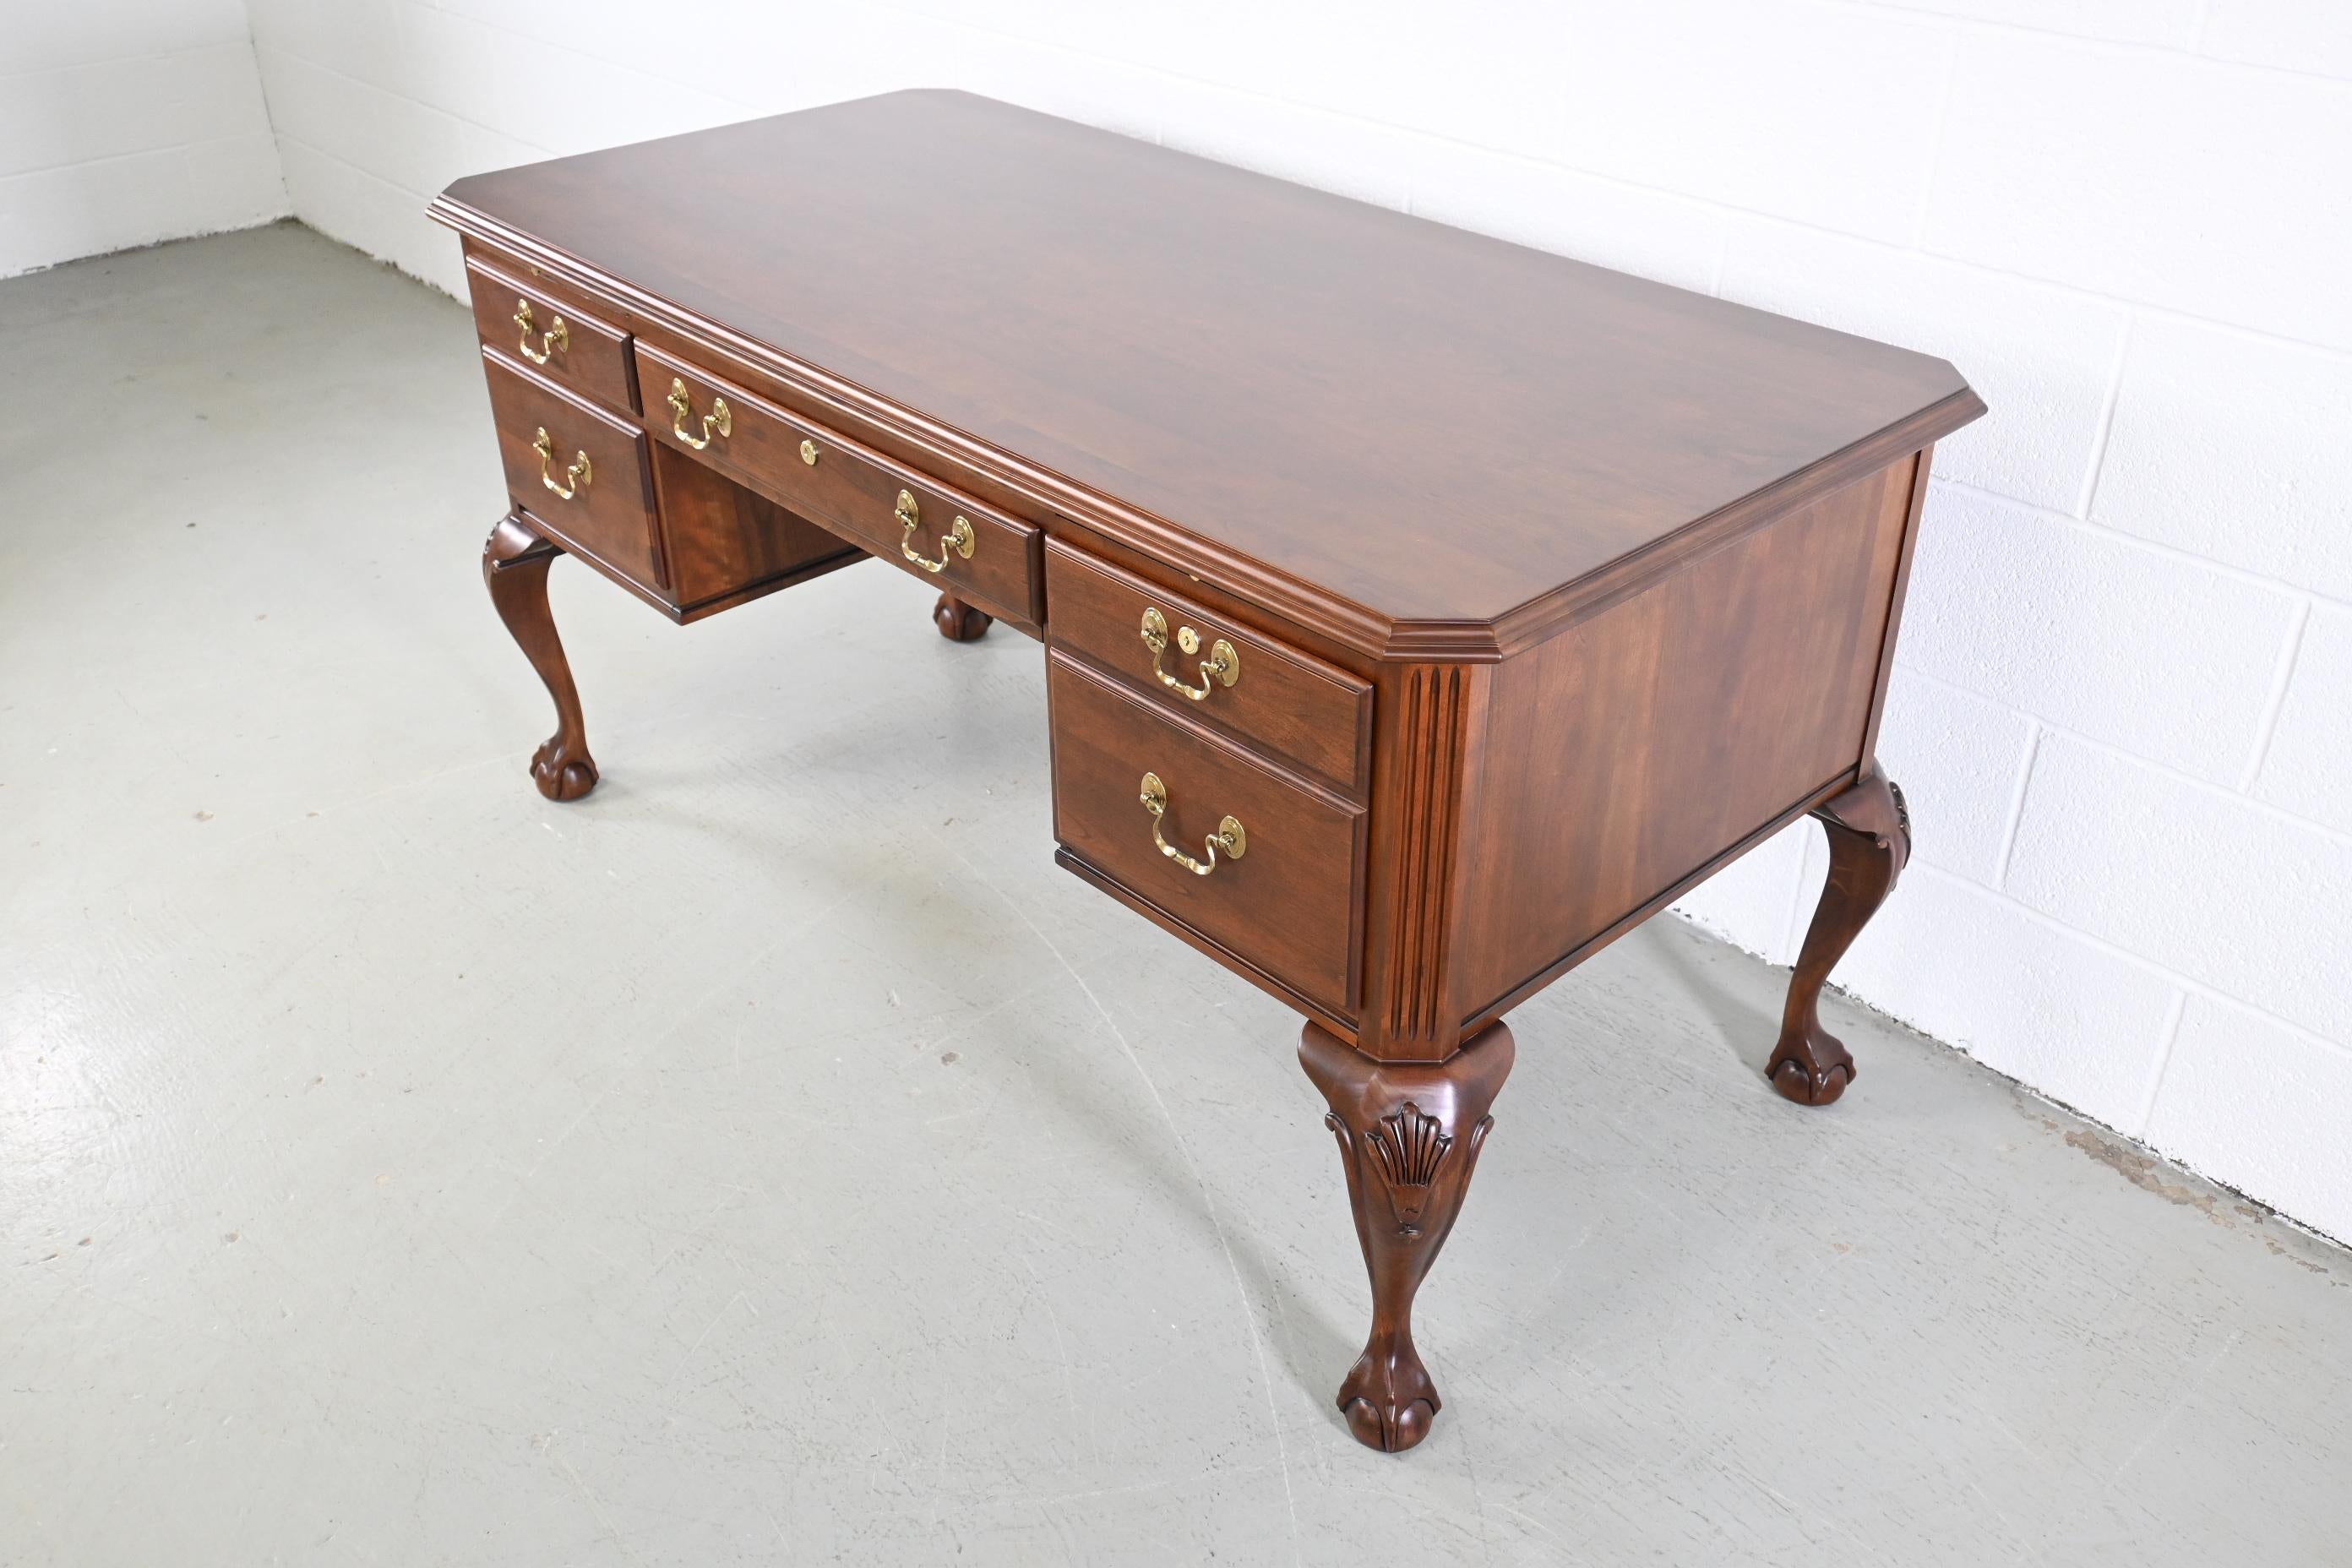 American Ethan Allen Furniture Cherry English Style Claw Foot Desk